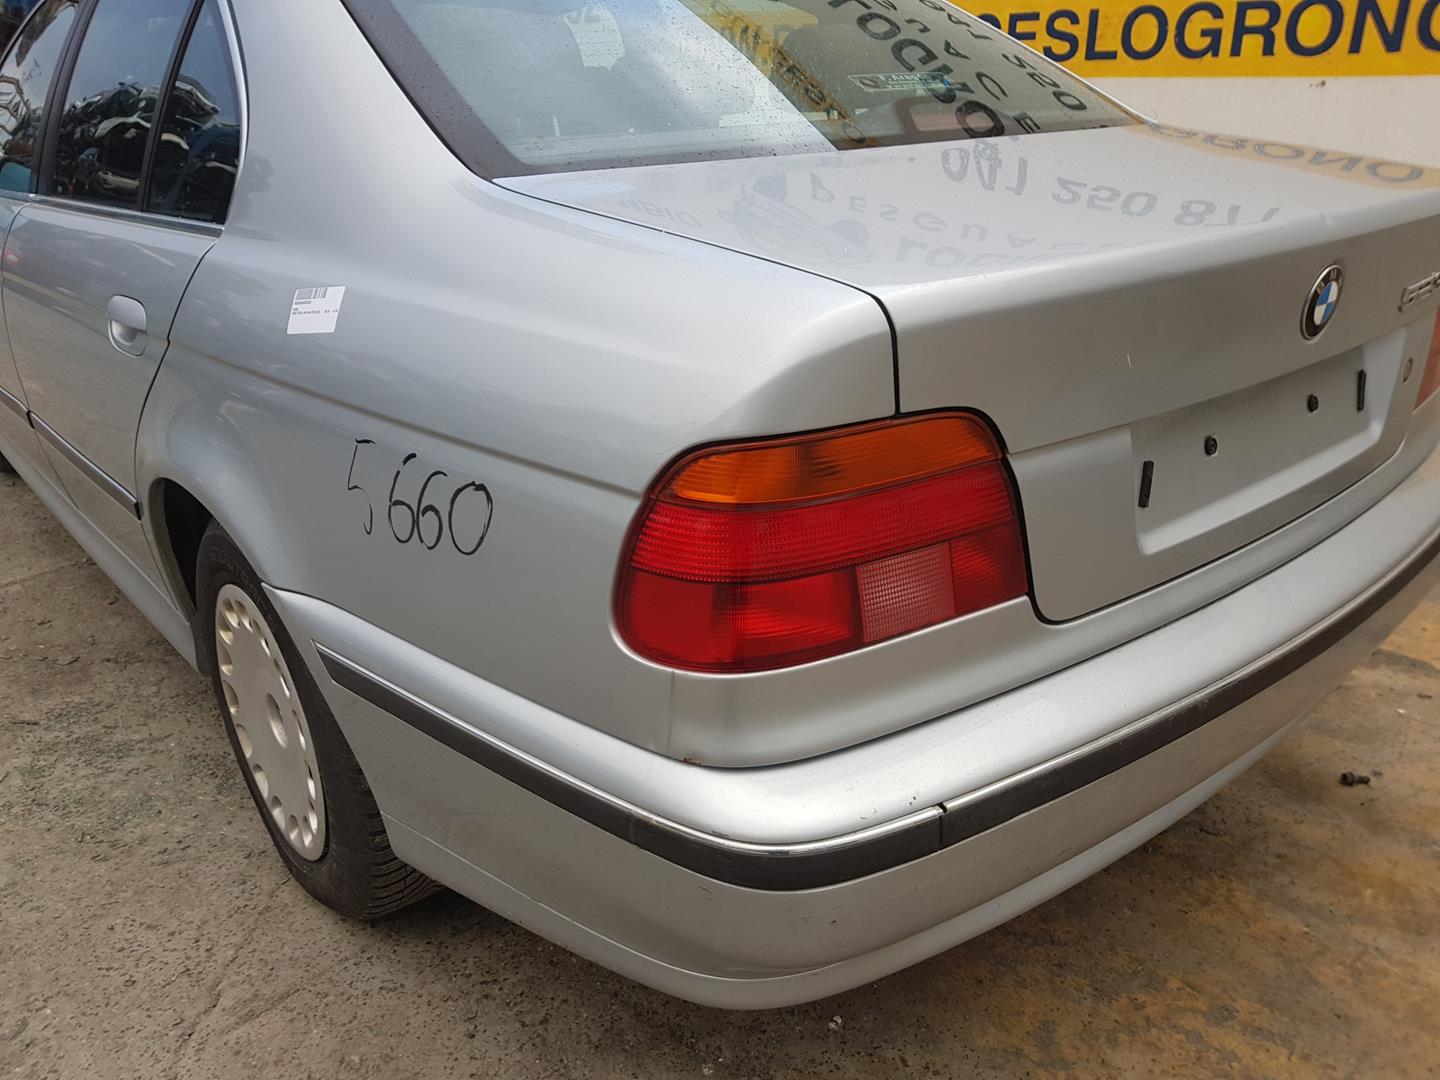 BMW 5 Series E39 (1995-2004) Left Side Roof Airbag SRS 72127000009, 7000009 19885935